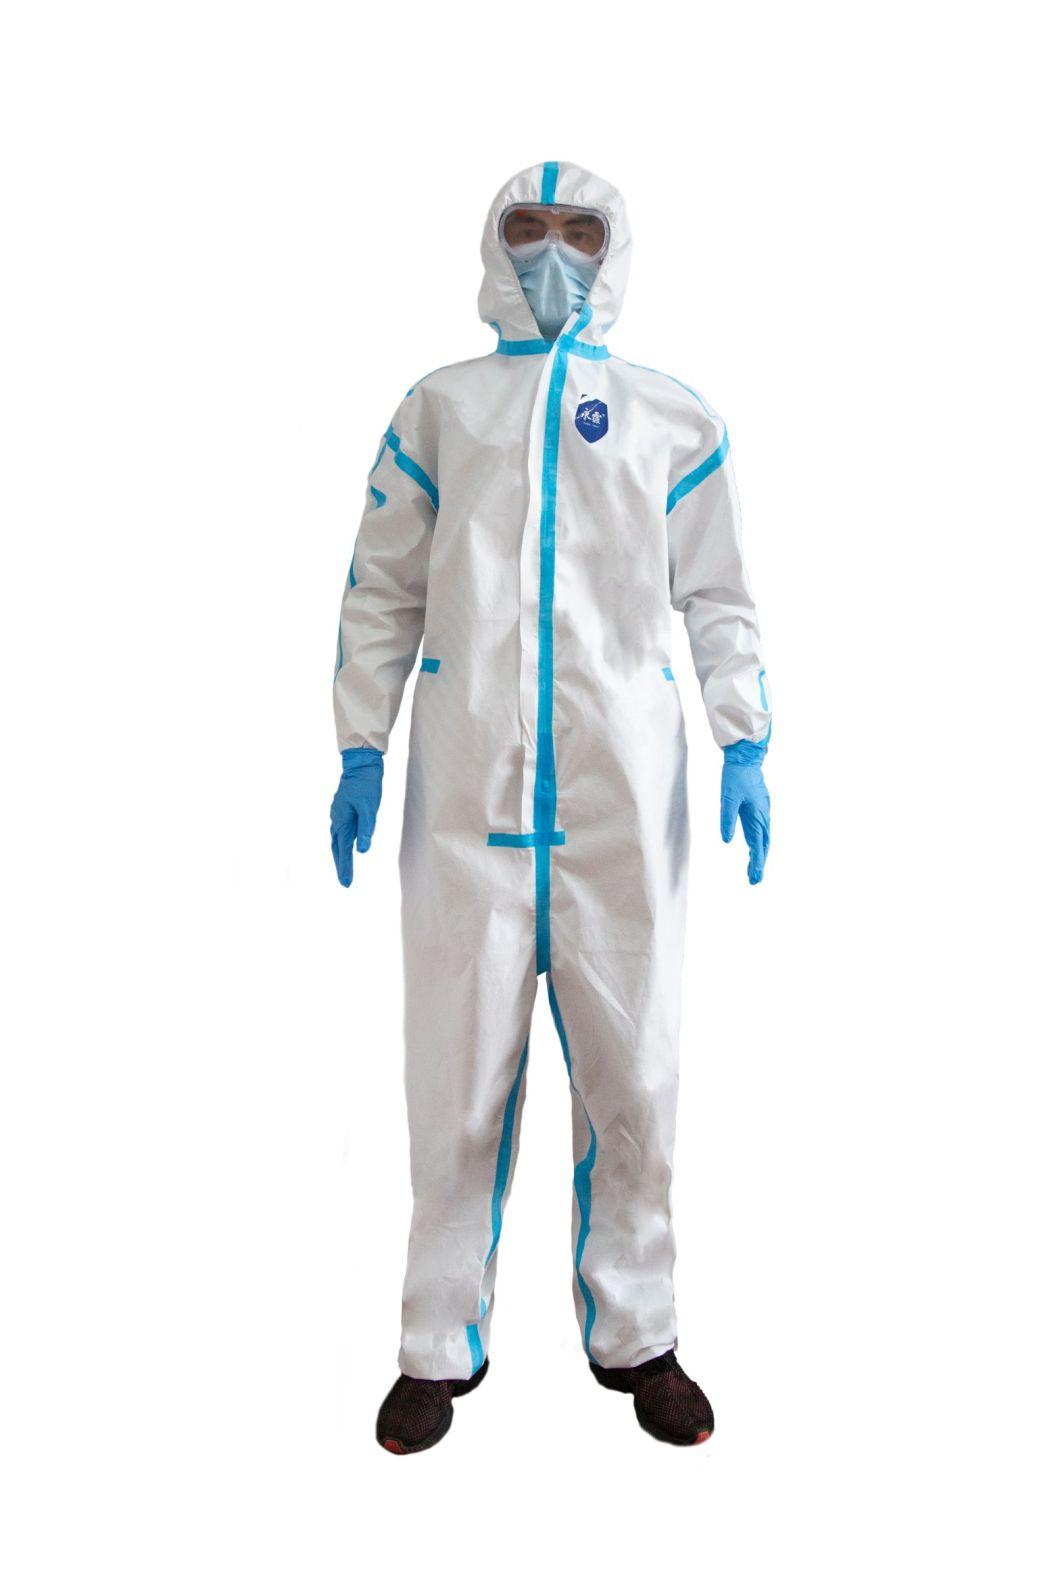 Cheap Disposable Coveralls Non Sterile Disposable Medical Protective Clothing